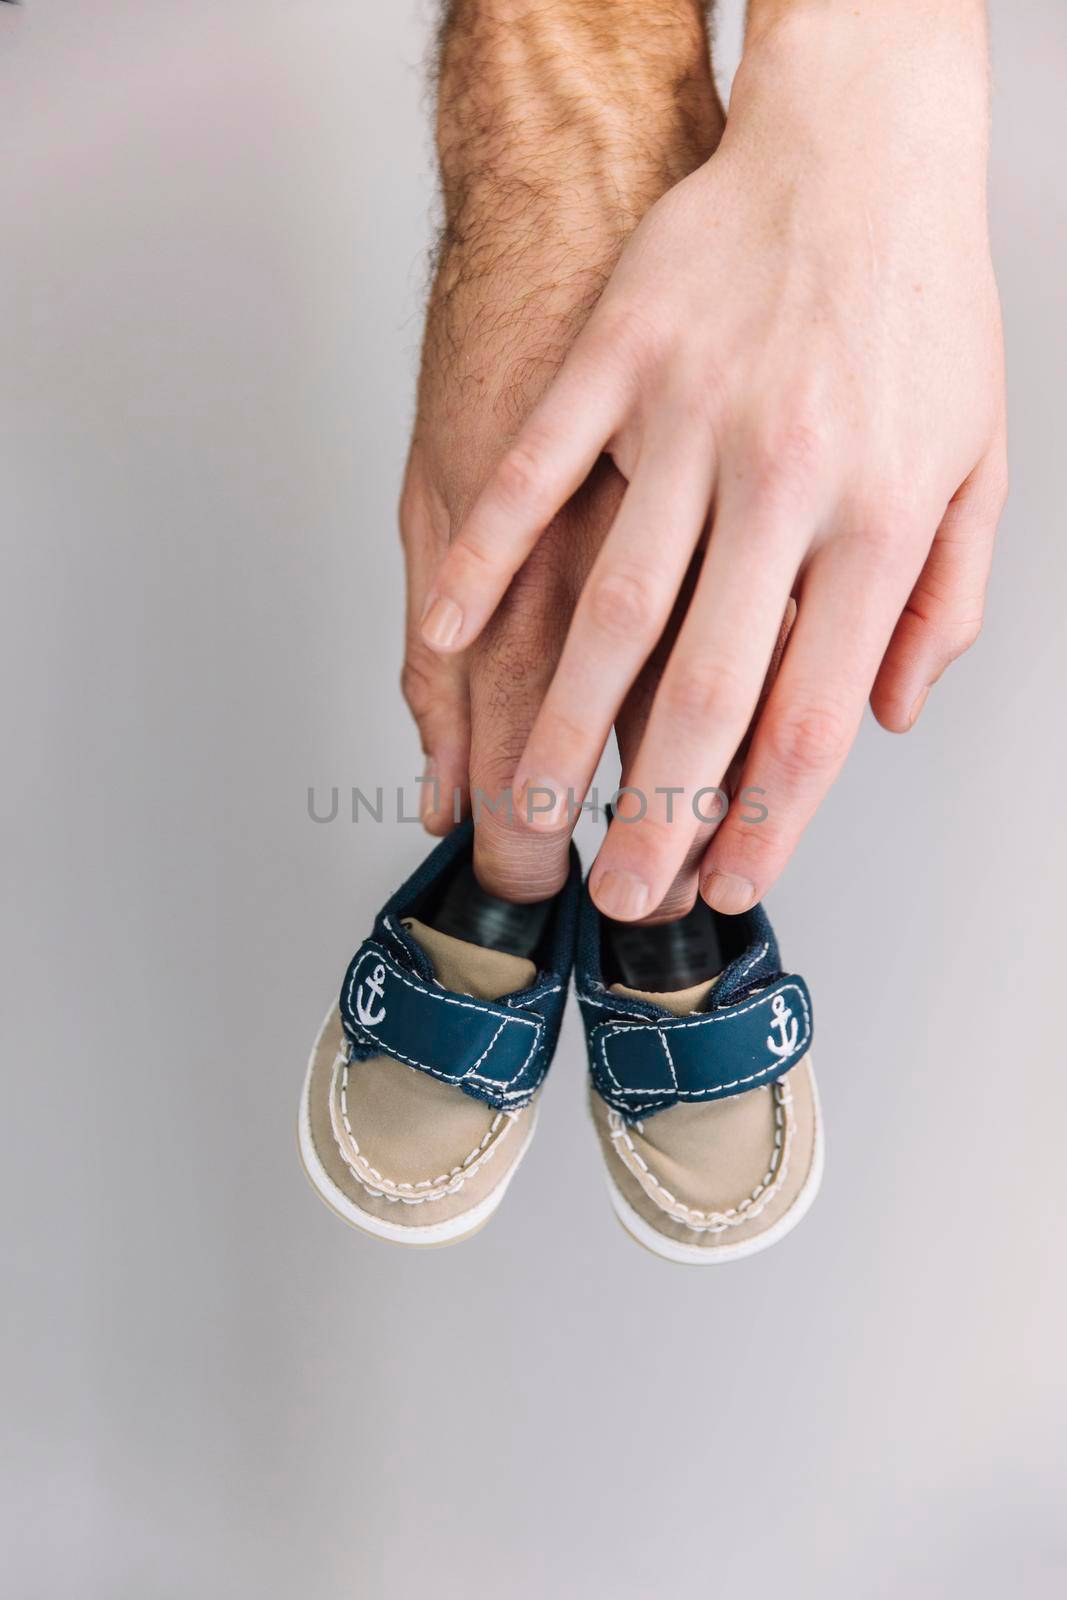 hand holding baby shoes